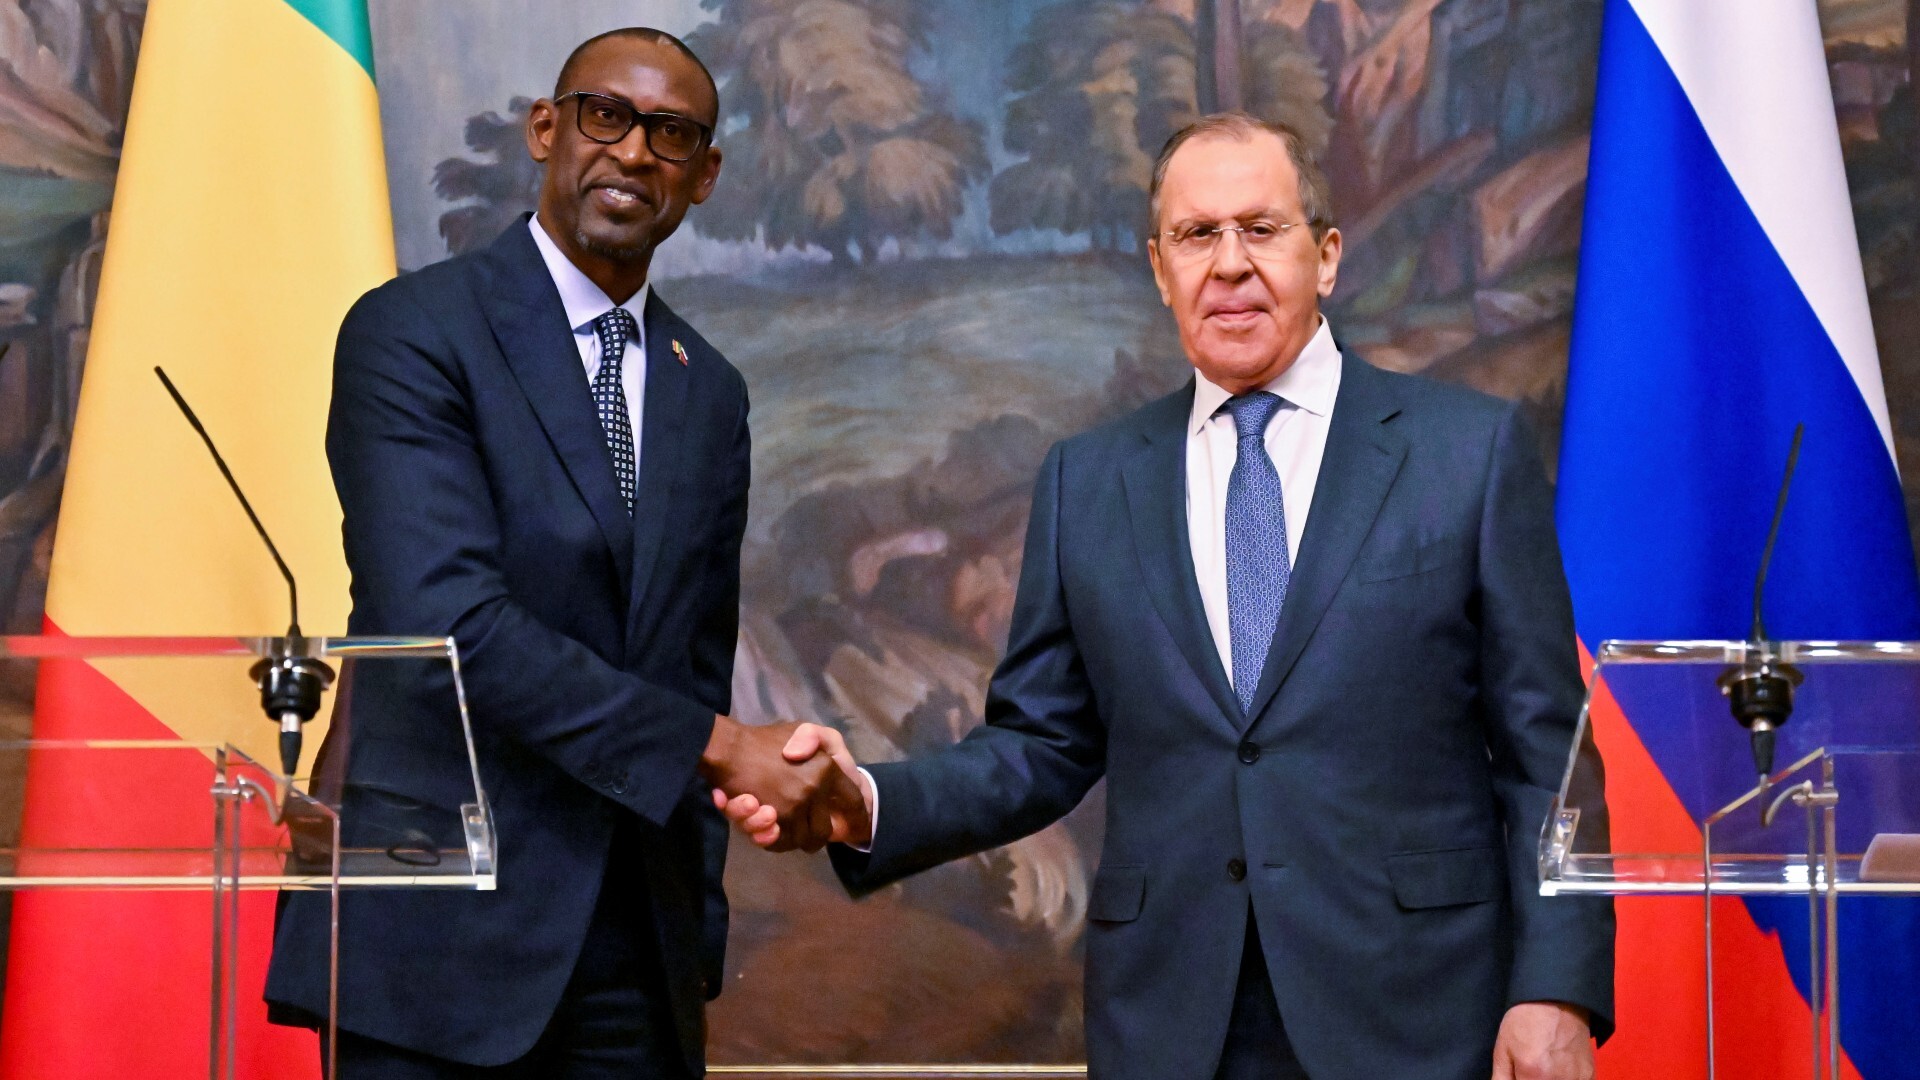 Is Russia extending its reach in Africa?